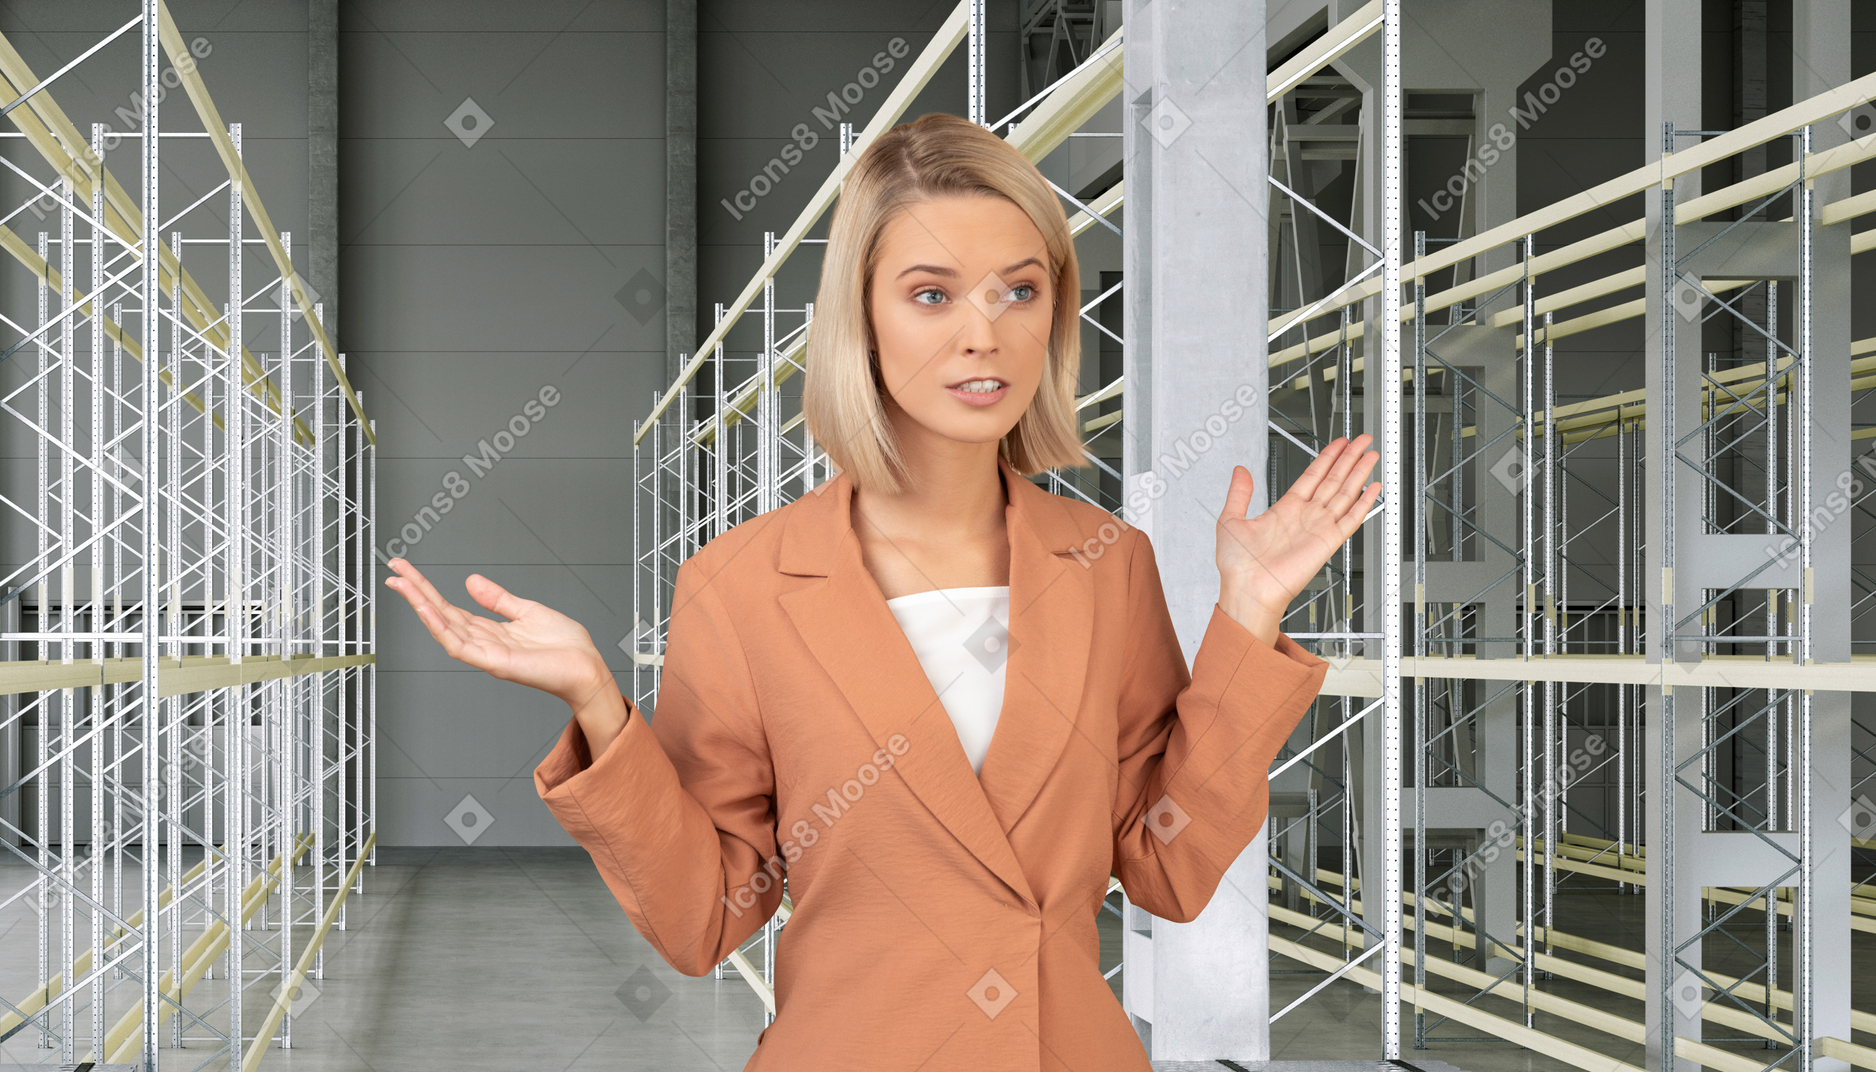 A woman standing in front of a row of scaffolding